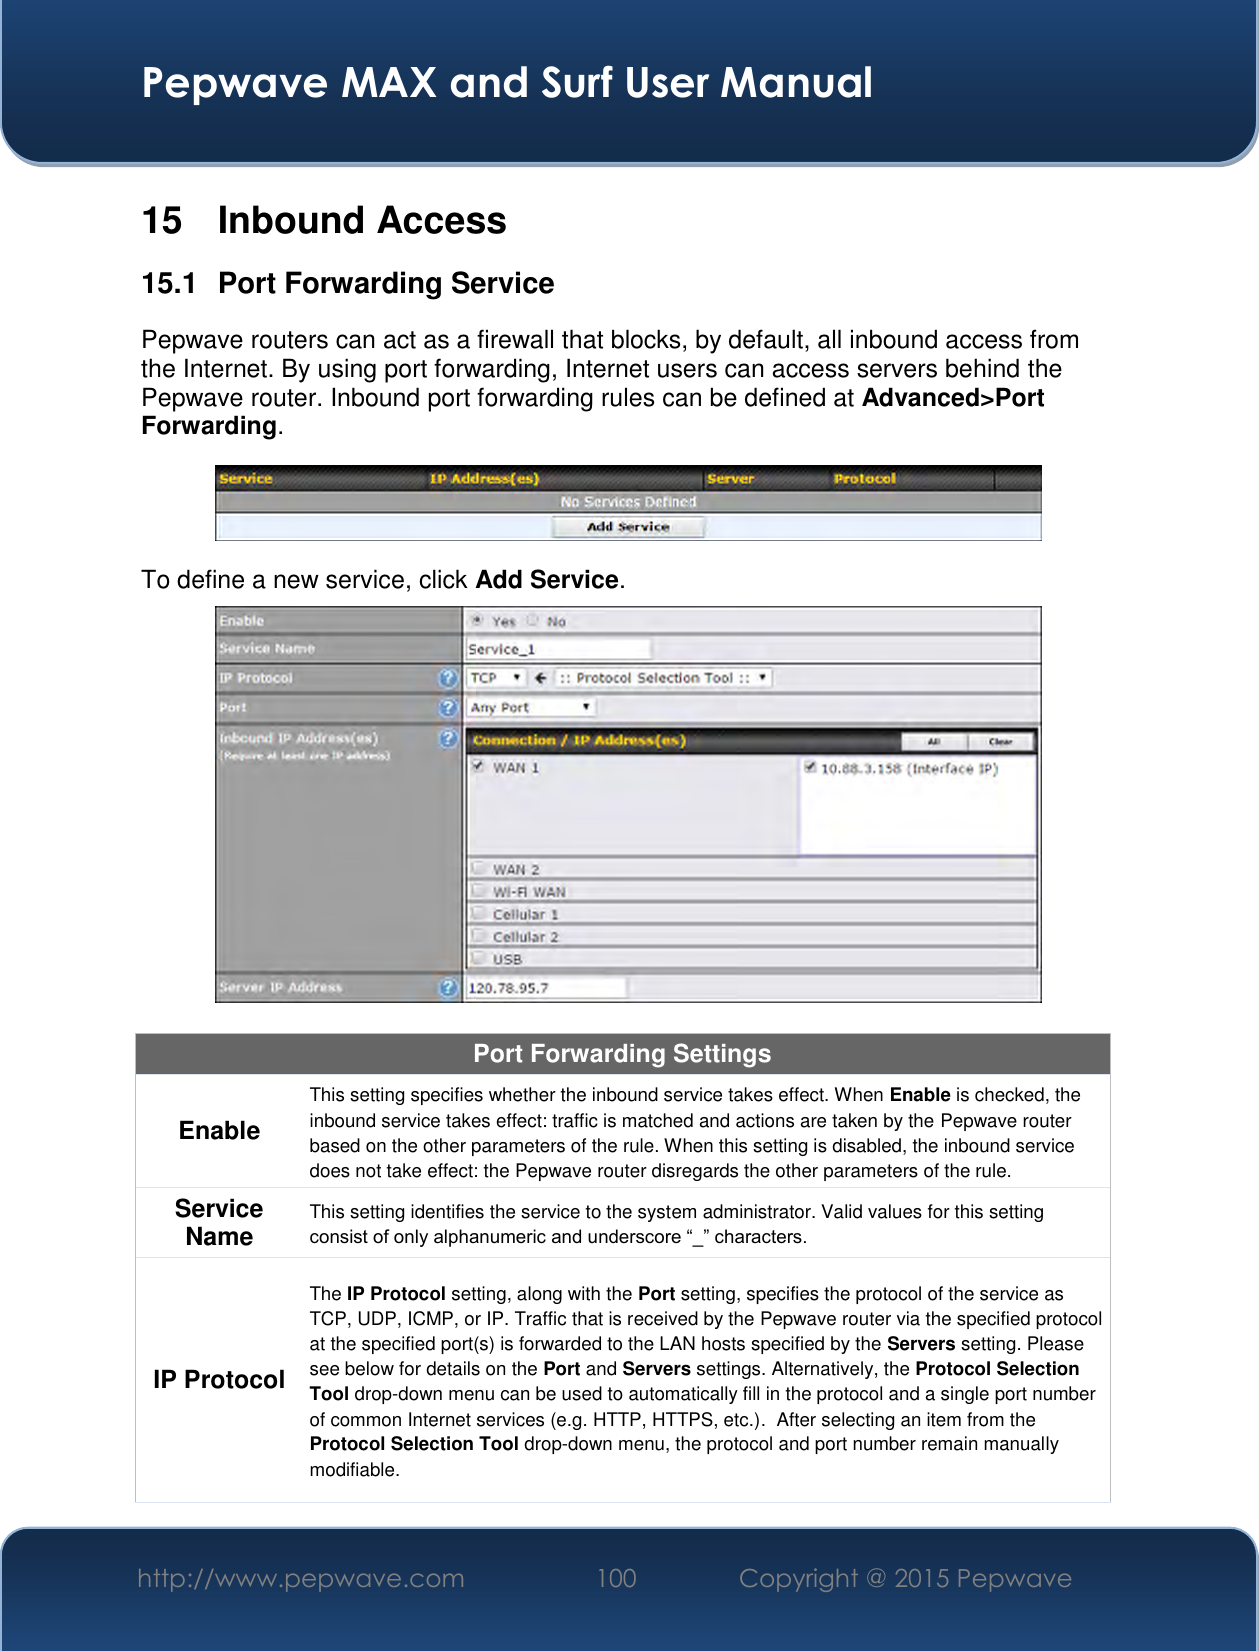  Pepwave MAX and Surf User Manual http://www.pepwave.com 100   Copyright @ 2015 Pepwave   15  Inbound Access 15.1  Port Forwarding Service Pepwave routers can act as a firewall that blocks, by default, all inbound access from the Internet. By using port forwarding, Internet users can access servers behind the Pepwave router. Inbound port forwarding rules can be defined at Advanced&gt;Port Forwarding.  To define a new service, click Add Service.   Port Forwarding Settings Enable This setting specifies whether the inbound service takes effect. When Enable is checked, the inbound service takes effect: traffic is matched and actions are taken by the Pepwave router based on the other parameters of the rule. When this setting is disabled, the inbound service does not take effect: the Pepwave router disregards the other parameters of the rule. Service Name This setting identifies the service to the system administrator. Valid values for this setting consist of only alphanumeric and underscore “_” characters. IP Protocol The IP Protocol setting, along with the Port setting, specifies the protocol of the service as TCP, UDP, ICMP, or IP. Traffic that is received by the Pepwave router via the specified protocol at the specified port(s) is forwarded to the LAN hosts specified by the Servers setting. Please see below for details on the Port and Servers settings. Alternatively, the Protocol Selection Tool drop-down menu can be used to automatically fill in the protocol and a single port number of common Internet services (e.g. HTTP, HTTPS, etc.).  After selecting an item from the Protocol Selection Tool drop-down menu, the protocol and port number remain manually modifiable. 